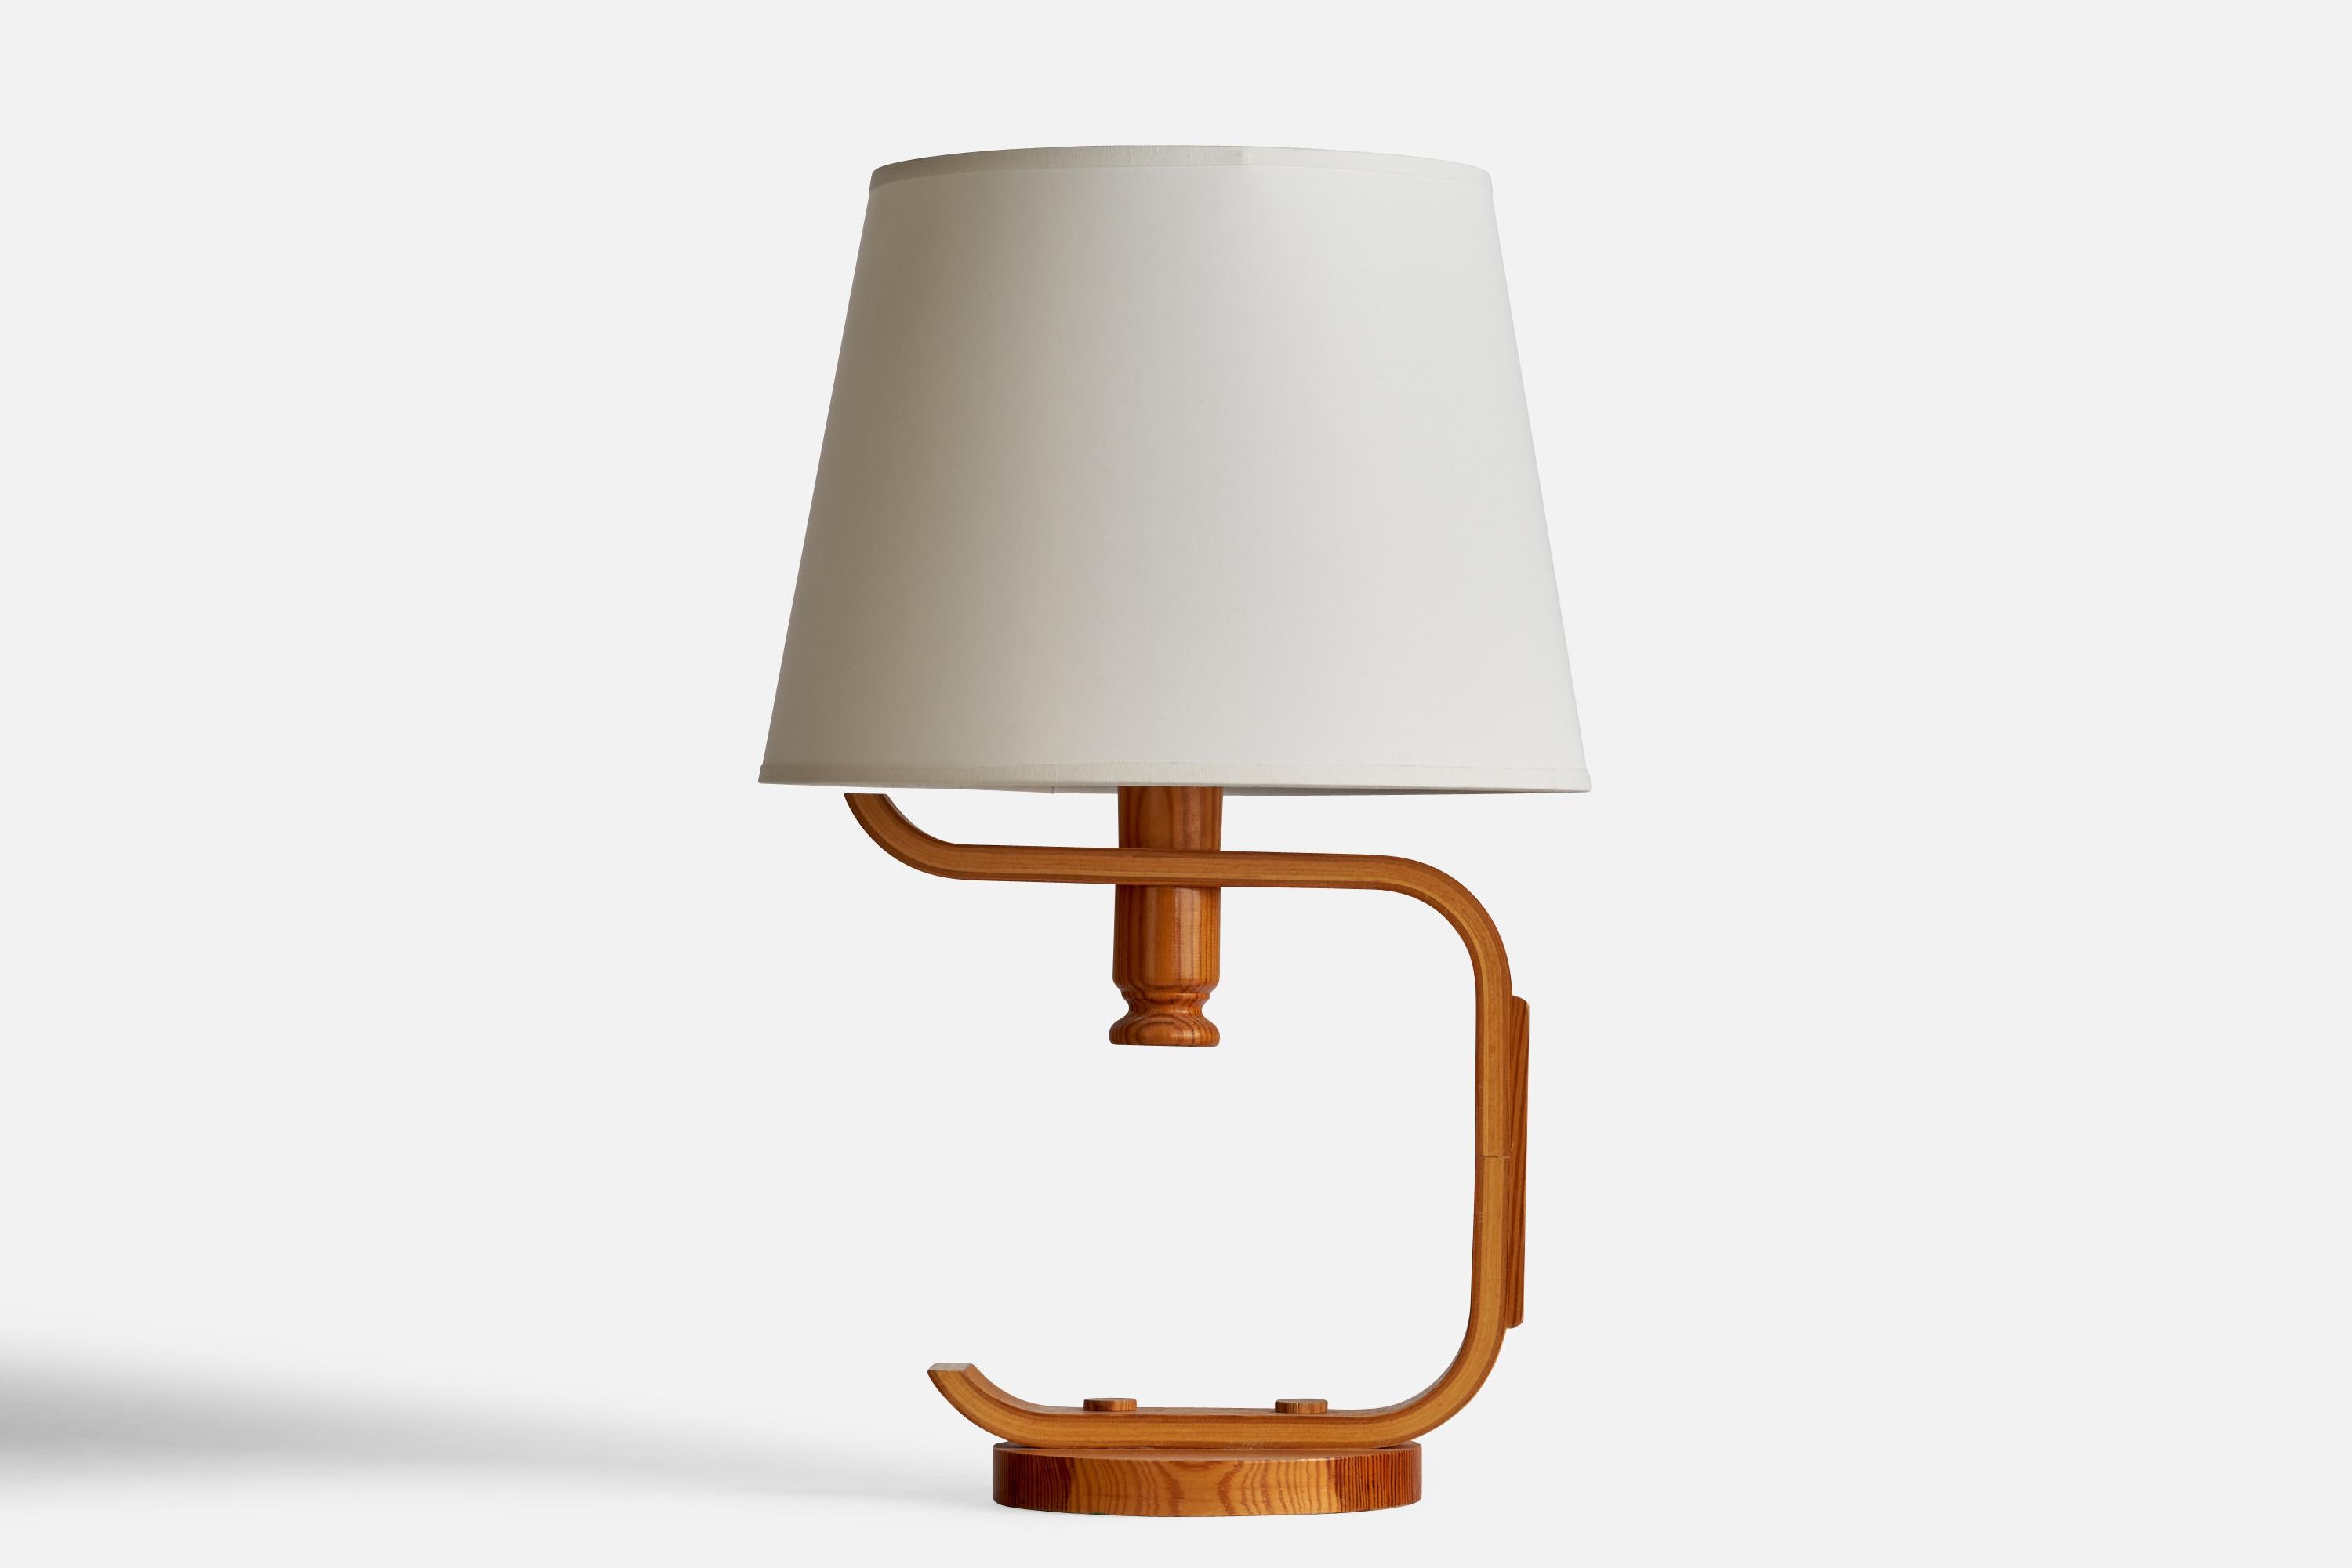 A moulded pine table lamp designed and produced in Sweden, 1970s.

Dimensions of Lamp (inches): 13.5” H x 10” Diameter
Dimensions of Shade (inches): 9” Top Diameter x 12” Bottom Diameter x 9” H
Dimensions of Lamp with Shade (inches): 19.25” H x 12”